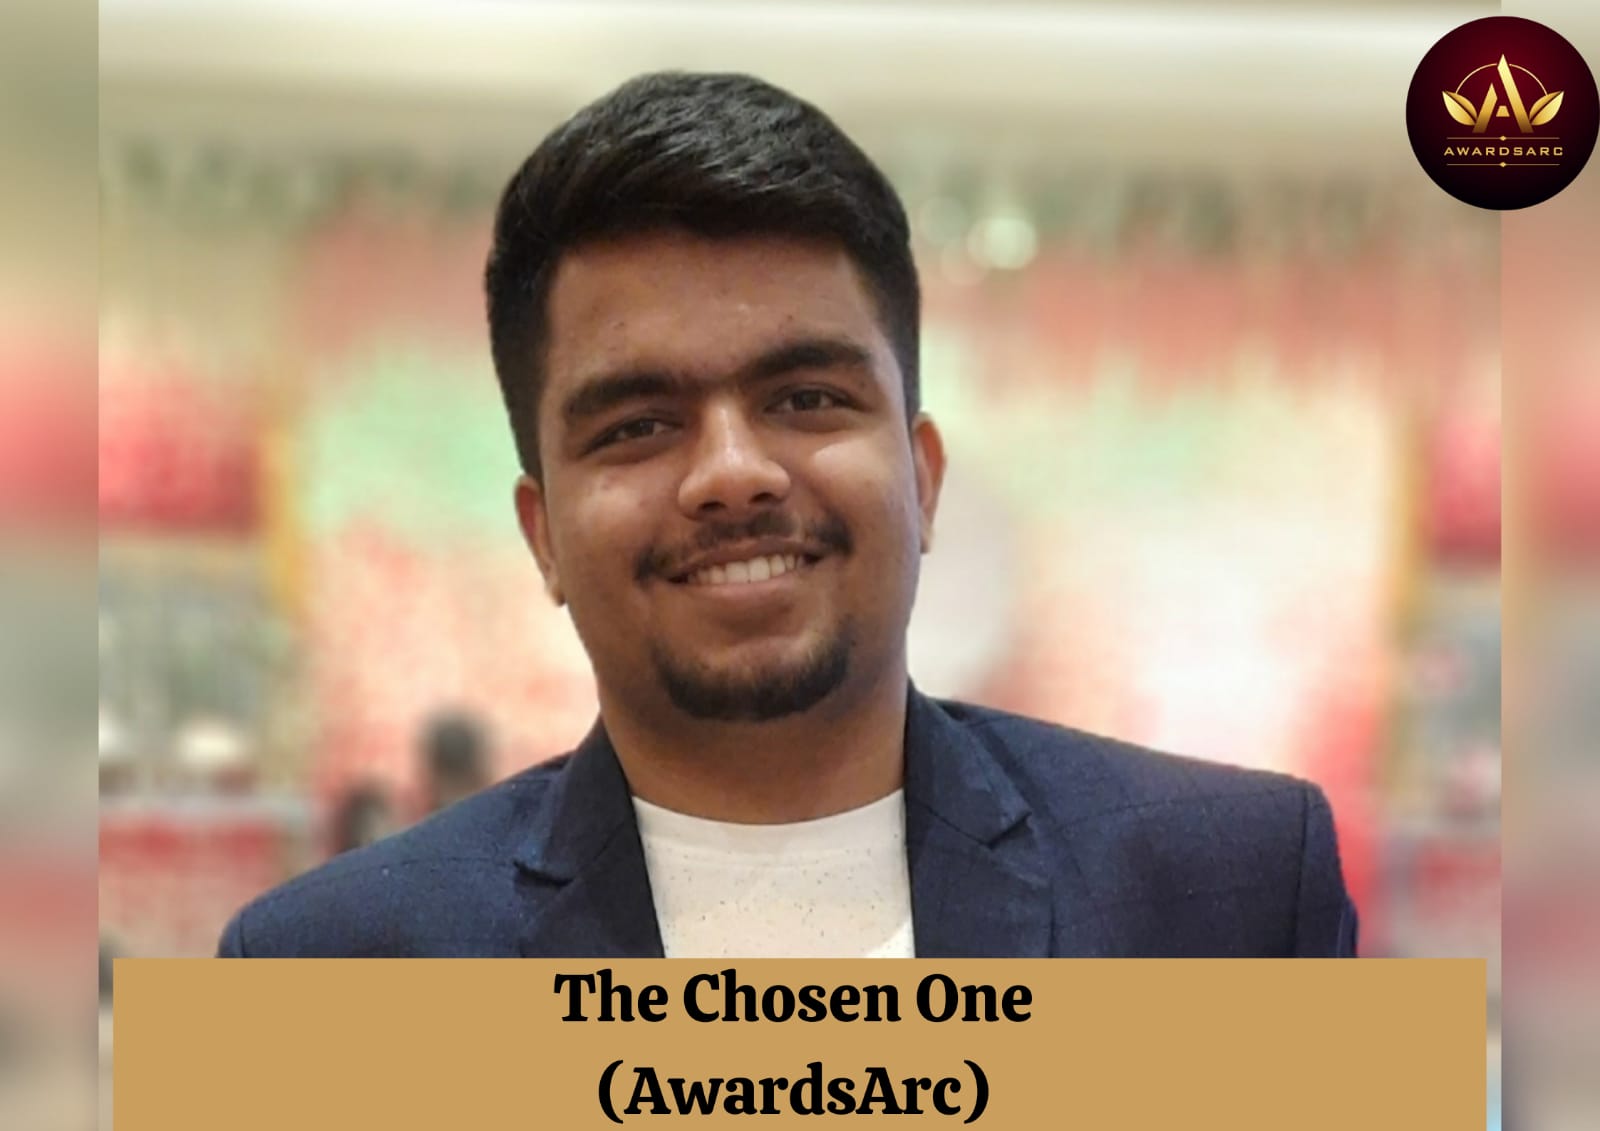 Rohan Kumar Arora is selected as one of THE CHOSEN ONES by AwardsArc